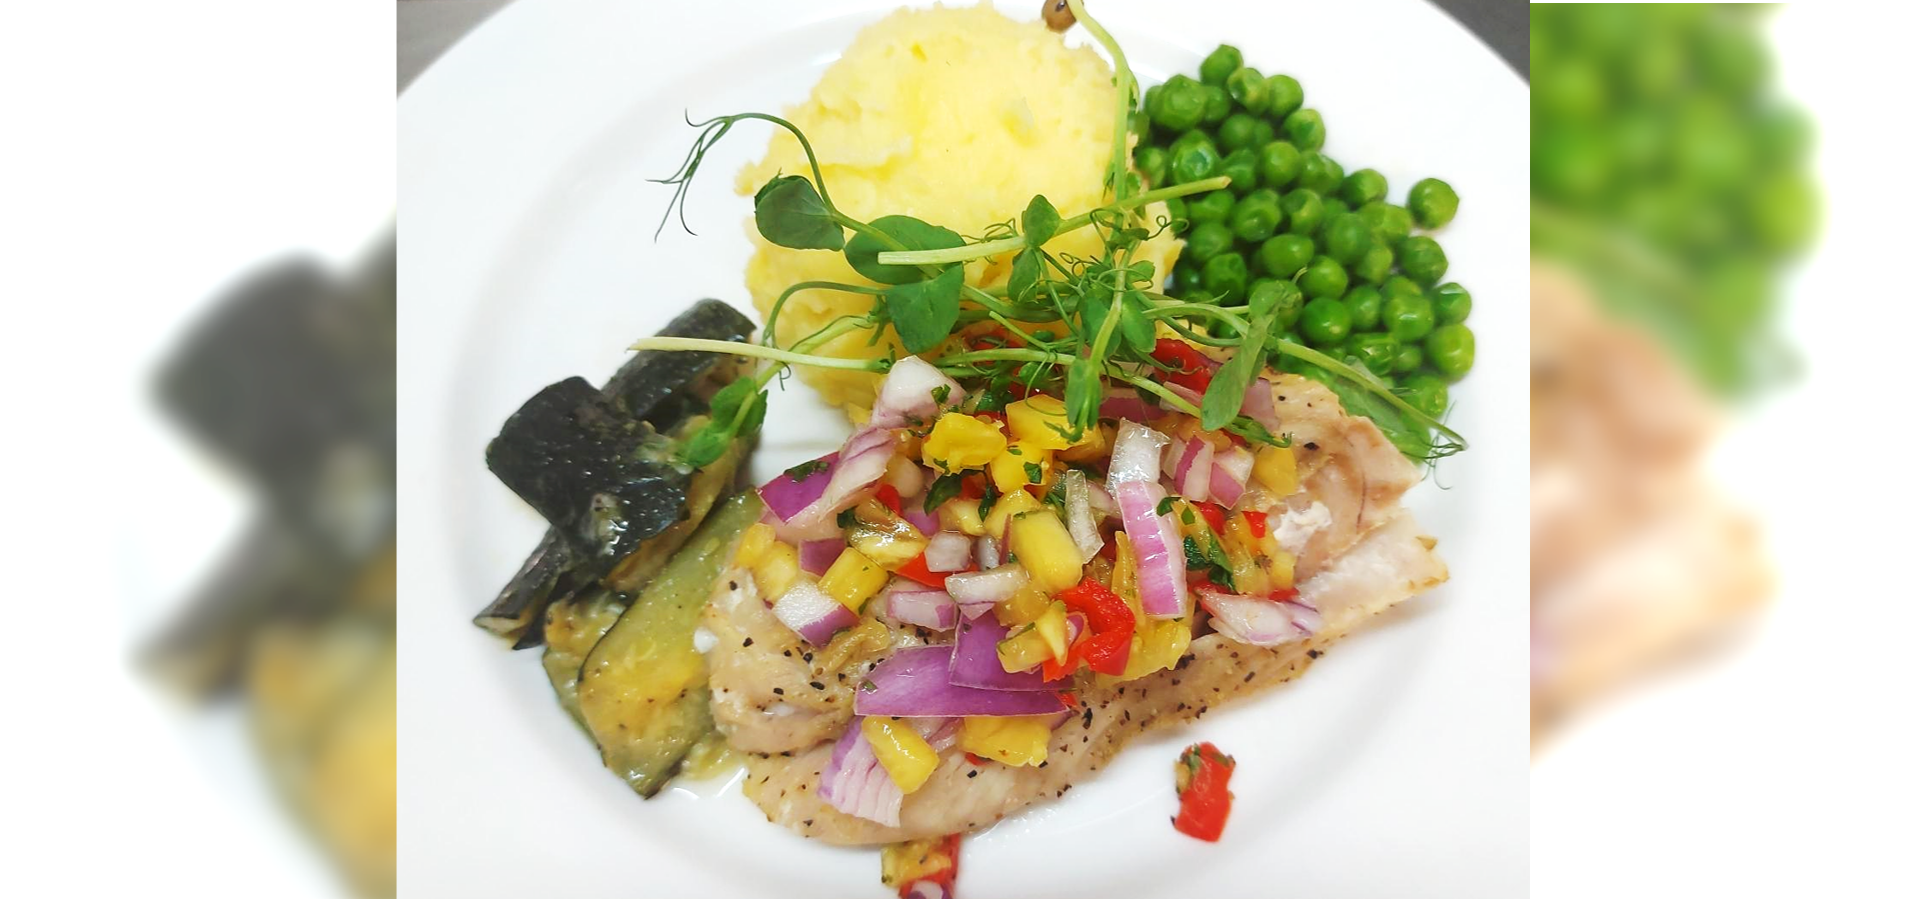 Grilled fish with pineapple salsa recipe